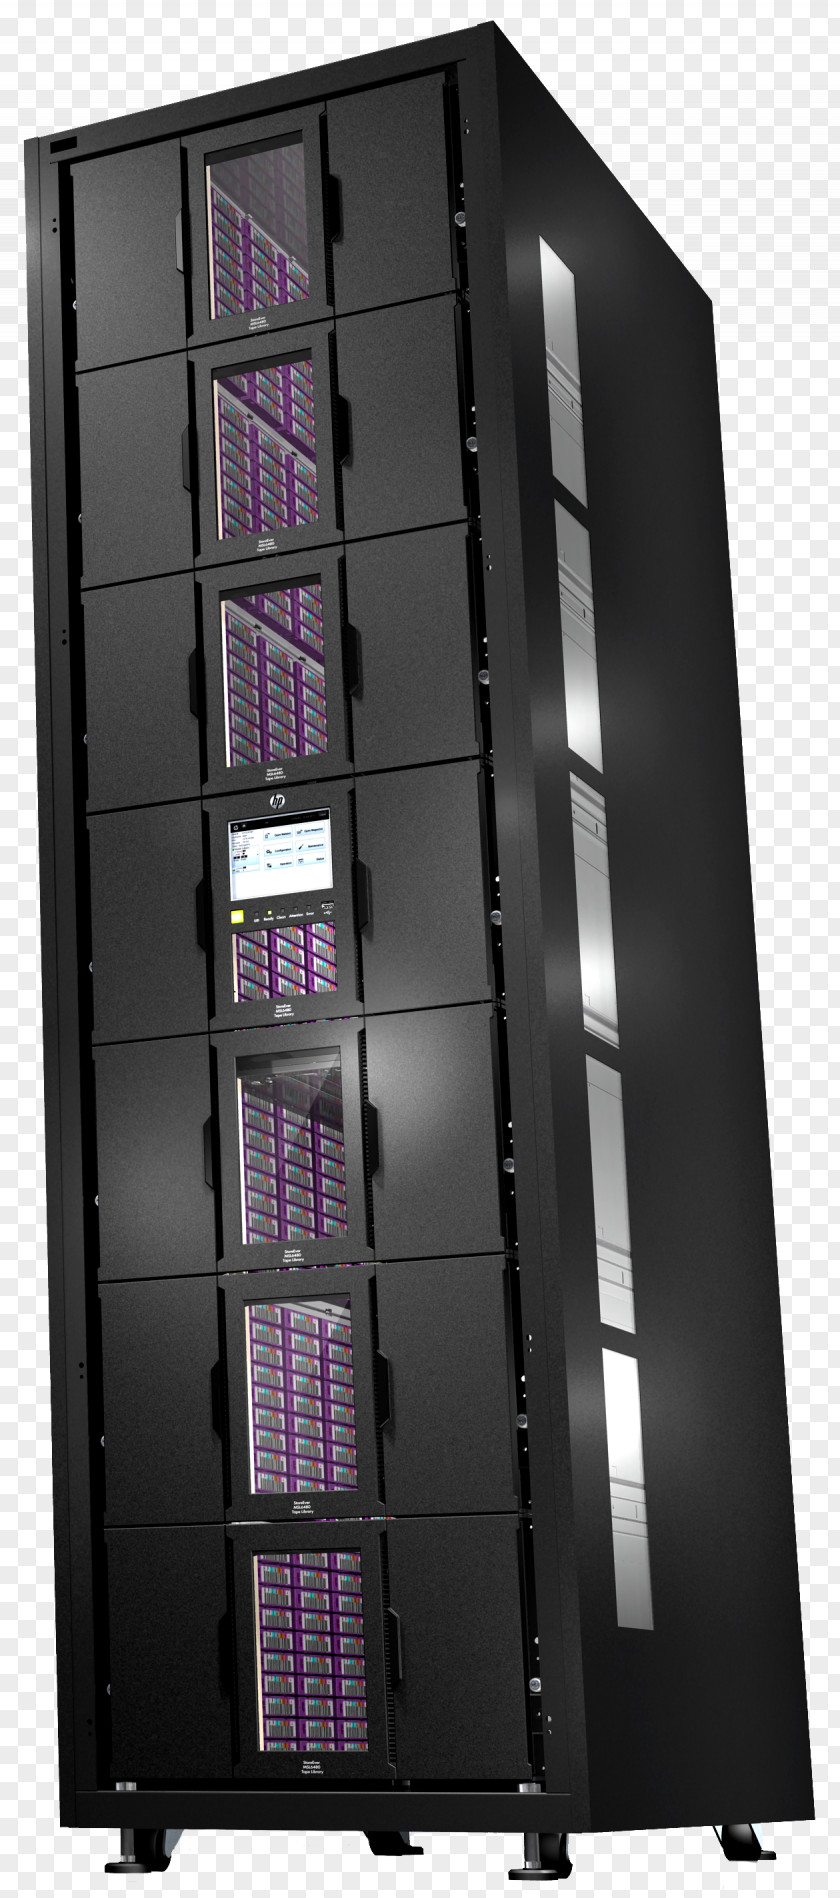 Tape Drive Computer Cases & Housings Disk Array Servers Cluster PNG